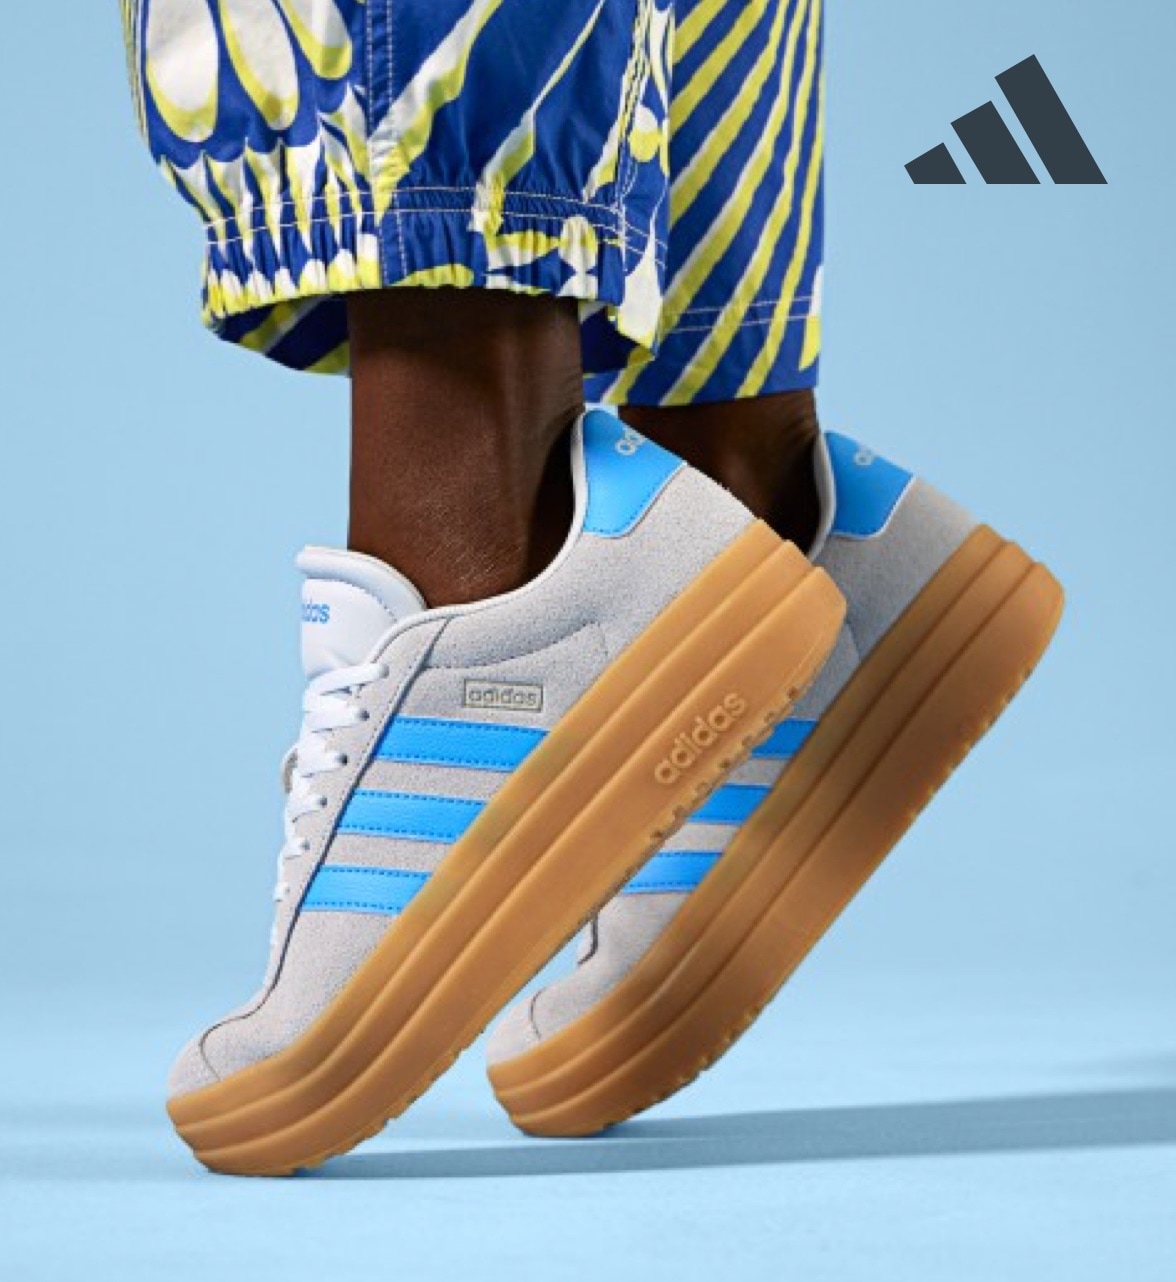 feet of person in blue and yellow printed pants wearing white and blue adidas court sneakers